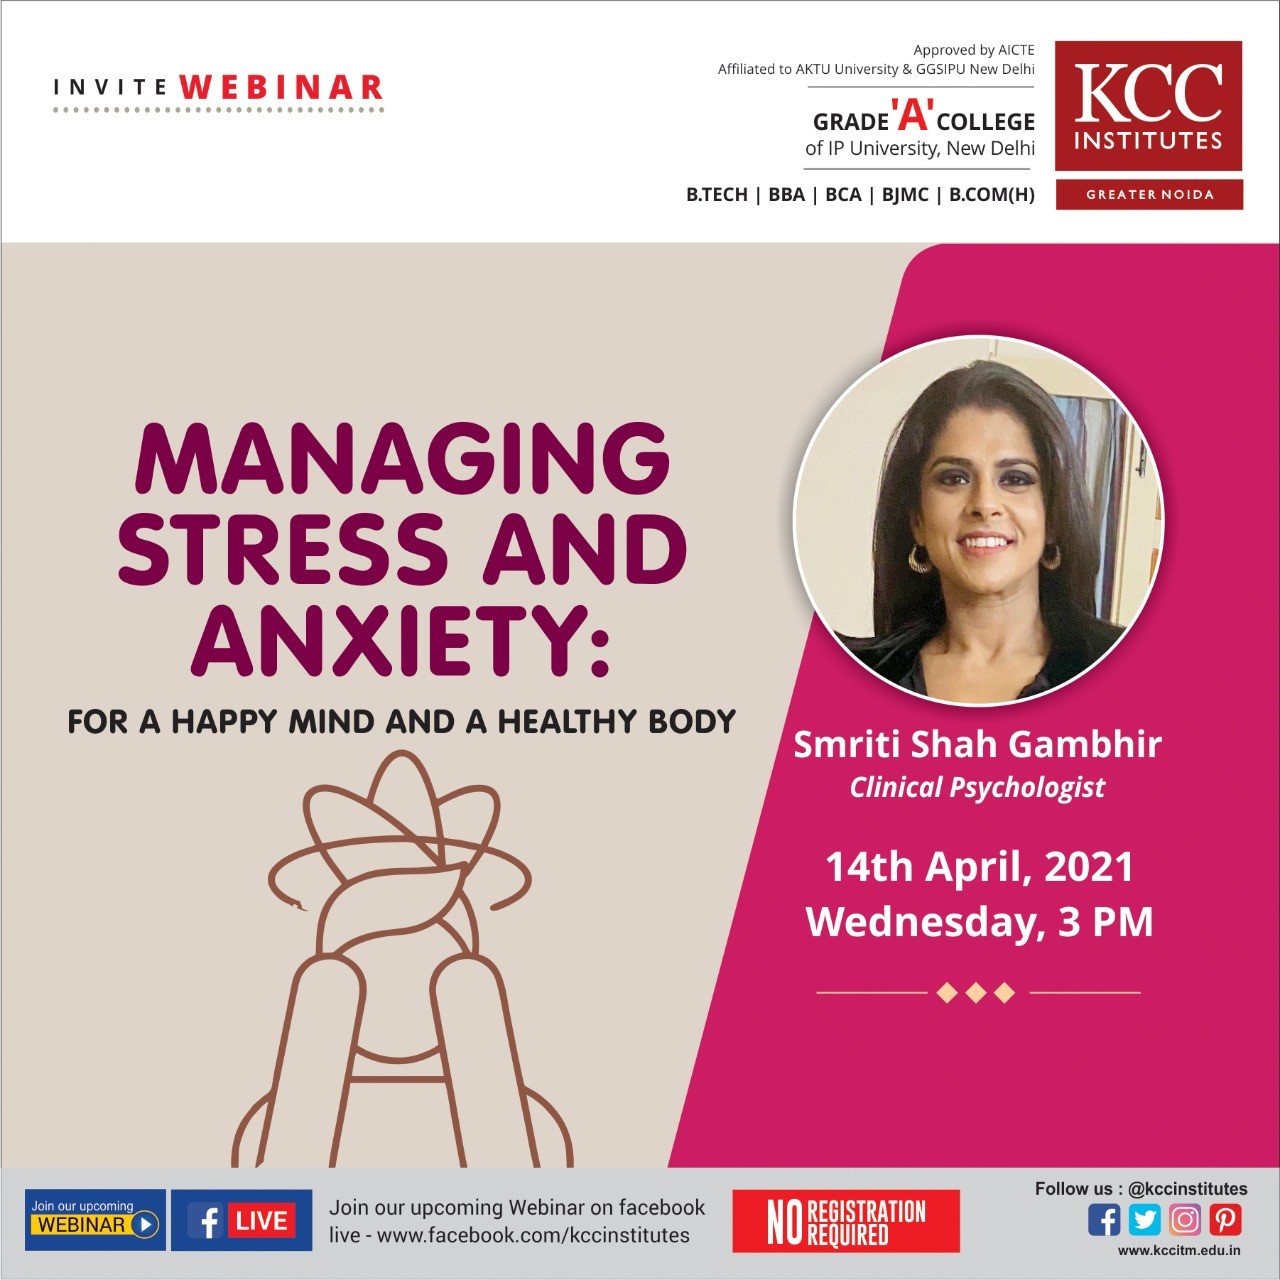 Ms. Smriti Shah Gambhir, Clinical Psychologist for the Webinar on "MANAGING STRESS AND ANXIETY: FOR A HAPPY MIND AND A HEALTHY BODY" Organized by KCC Institutes, Delhi-NCR, Greater Noida.